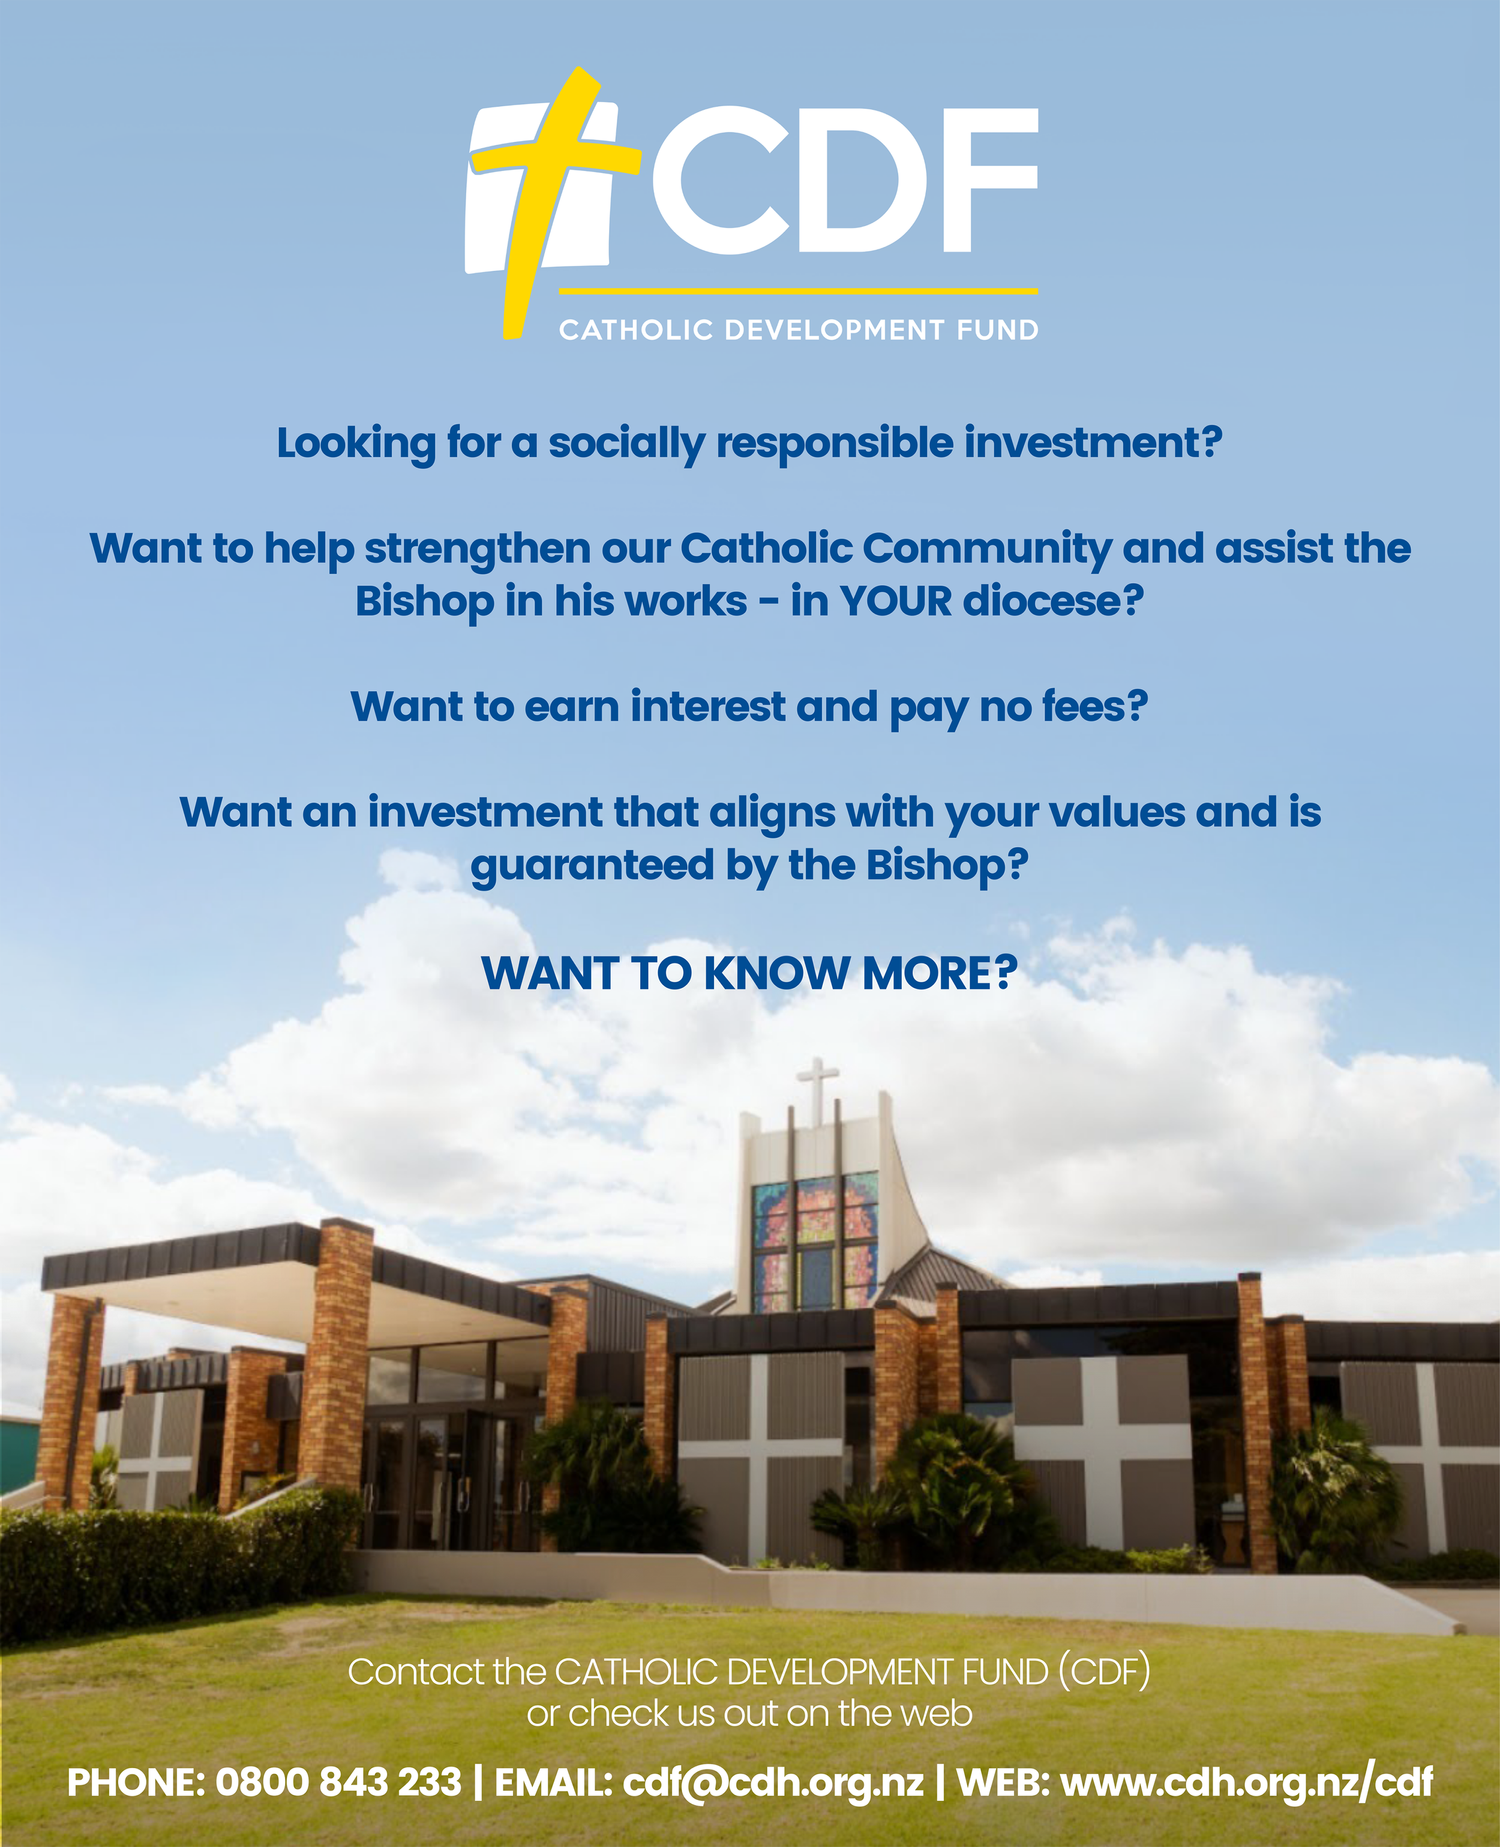    Catholic Development Fund - your socially responsible investment